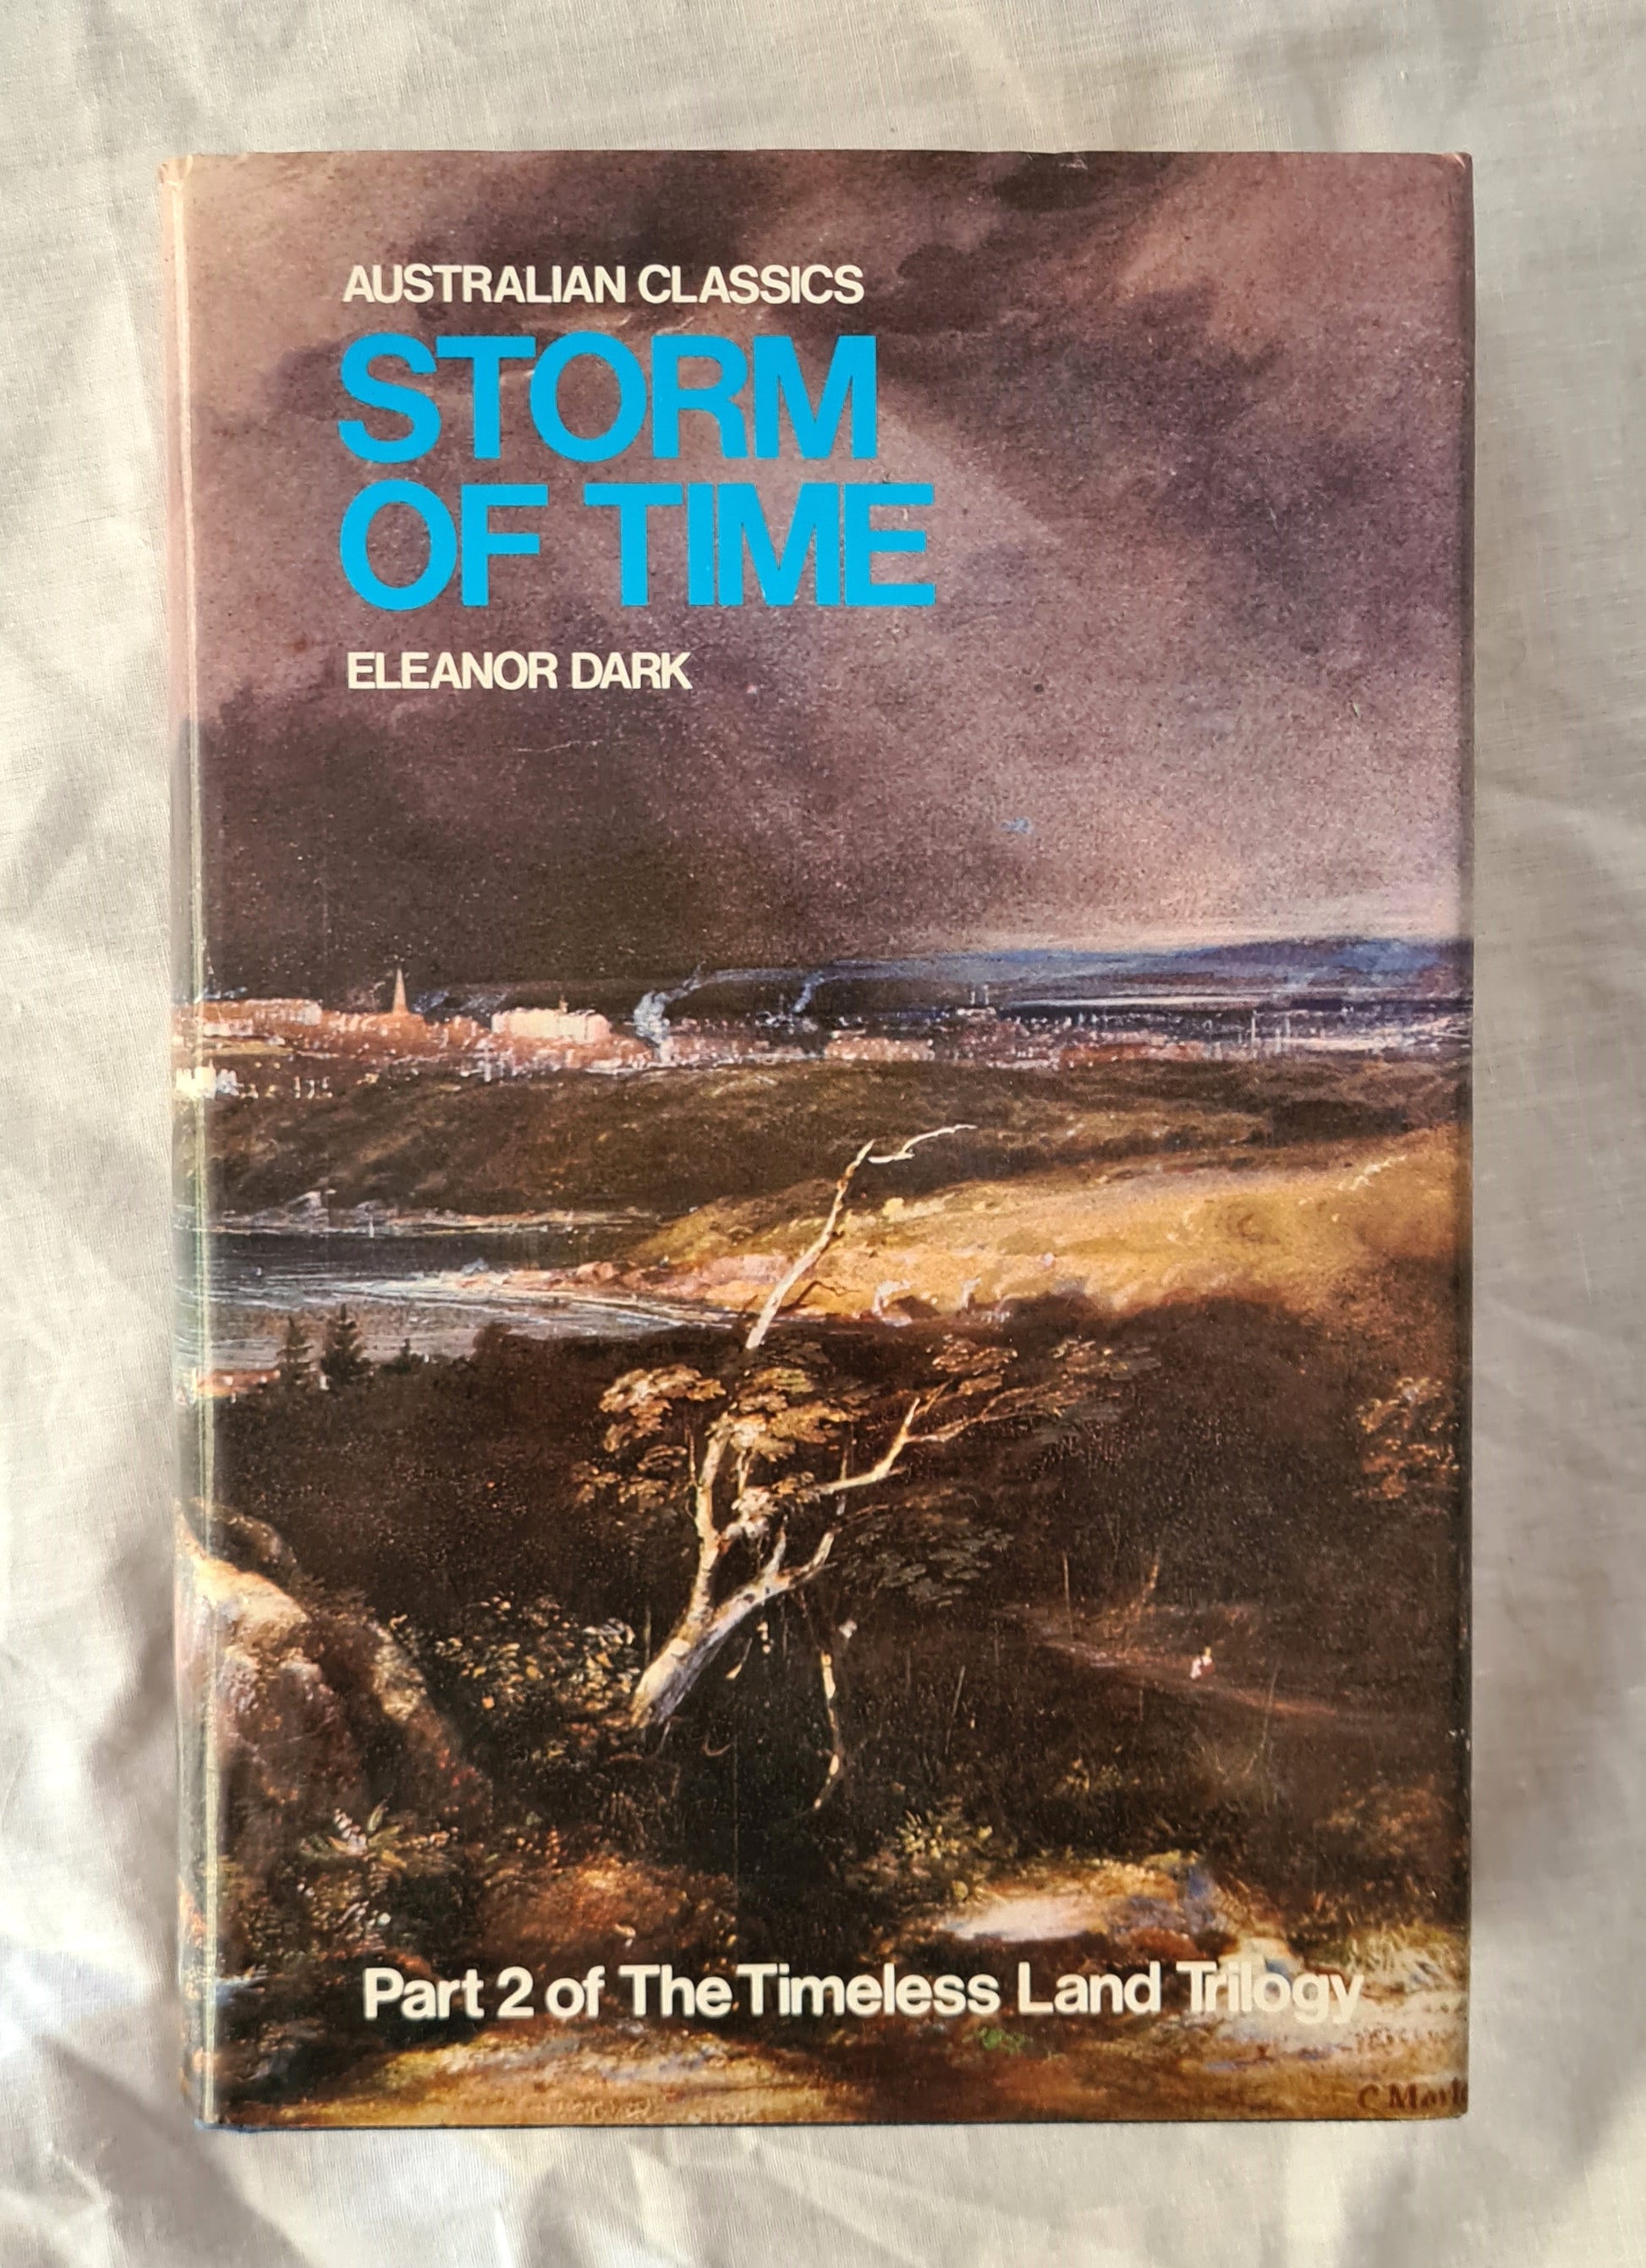 Storm of Time  by Eleanor Dark  Part 2 of The Timeless Land Trilogy  (Australian Classics)